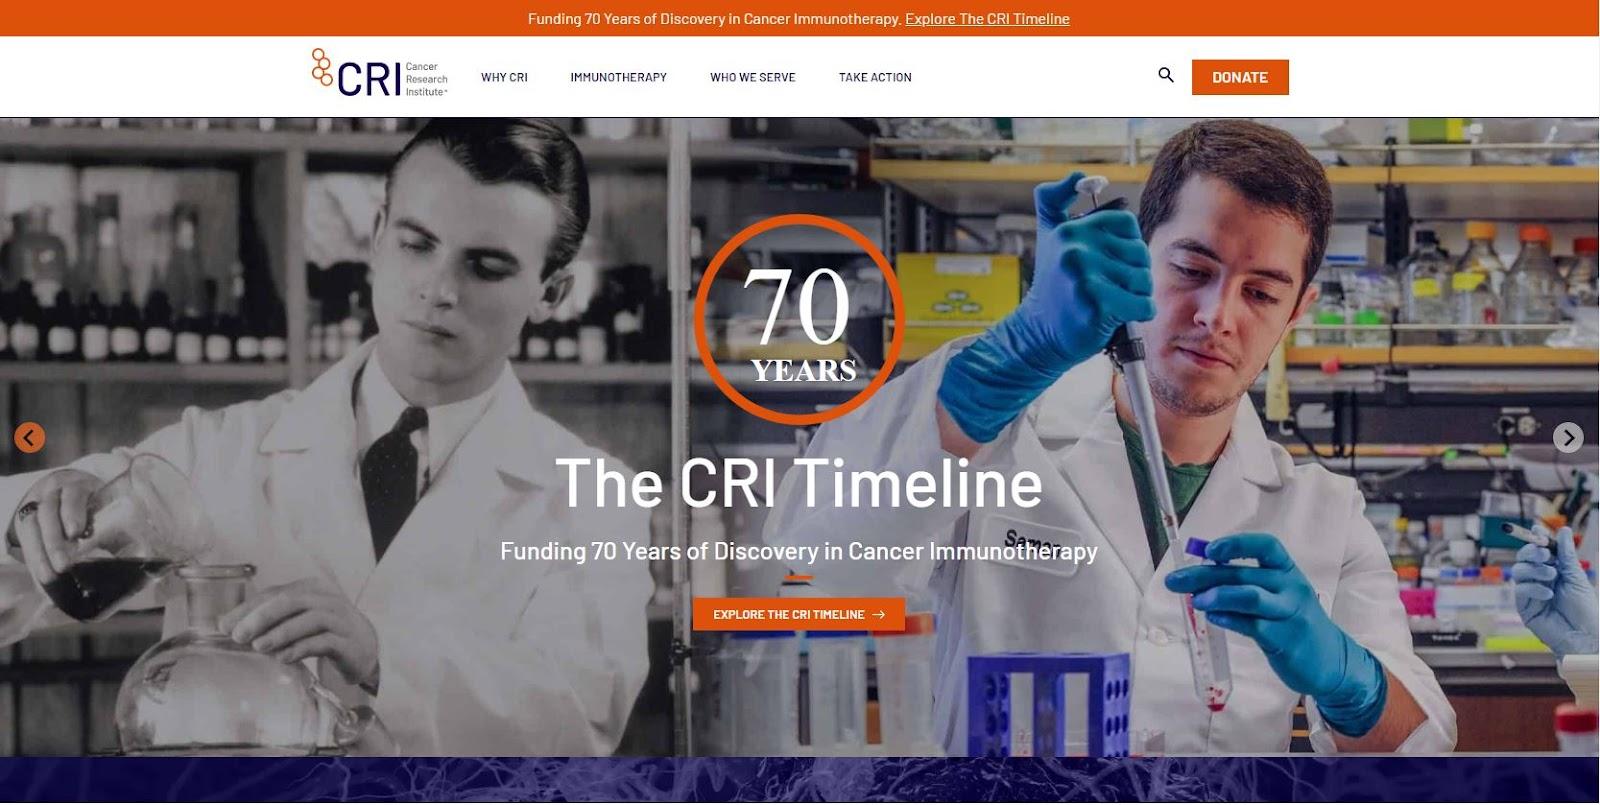 charity website design examples, Cancer Research Institute